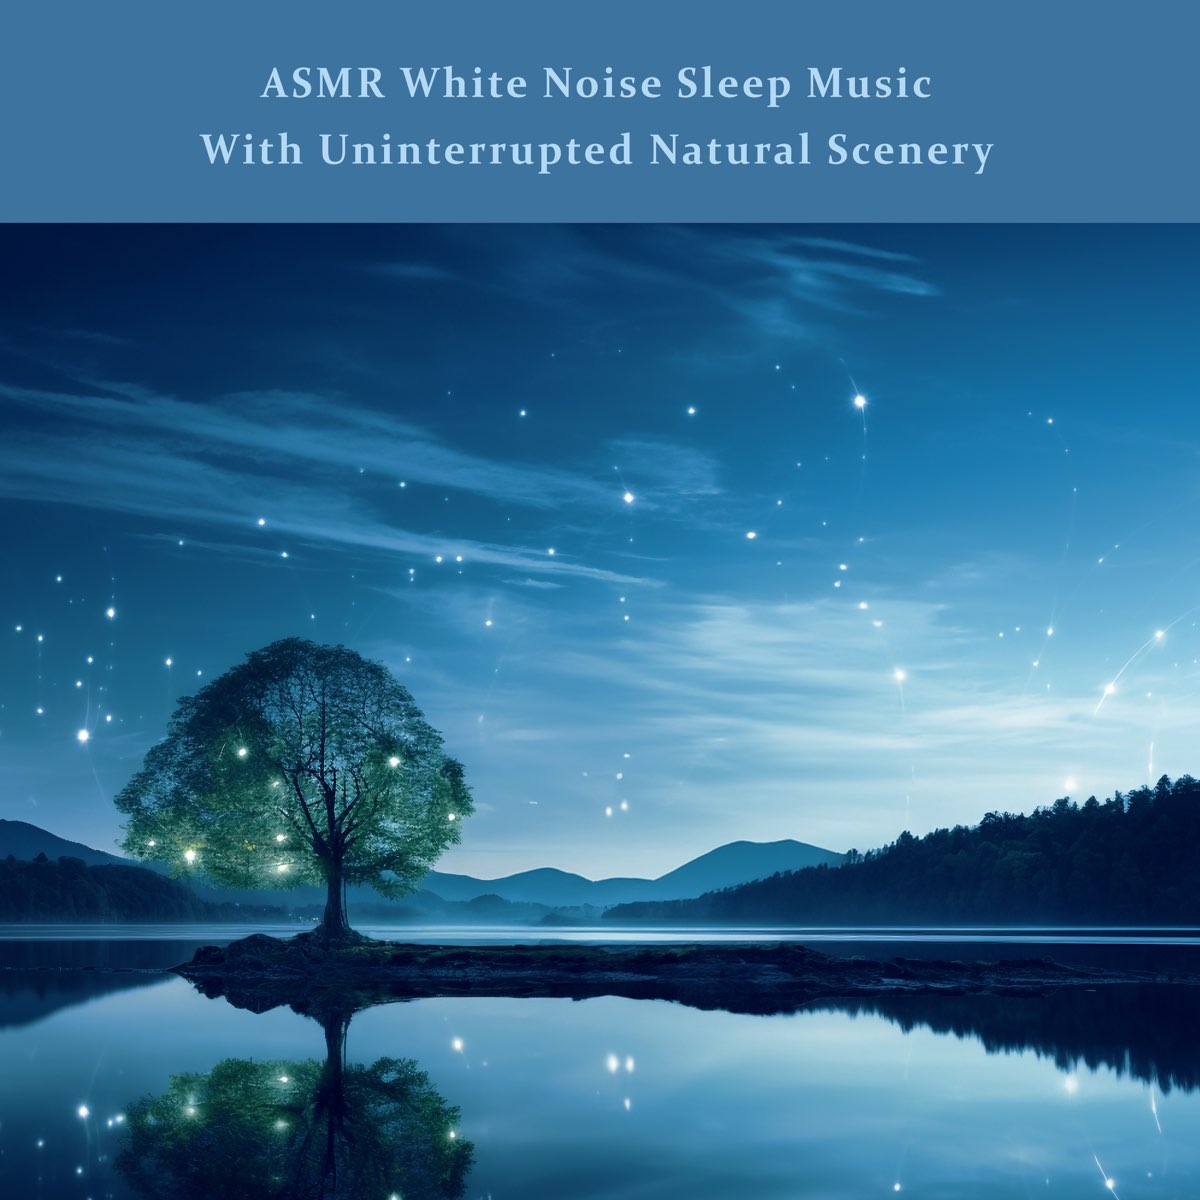 ‎ASMR White Noise Sleep Music With Uninterrupted Natural Scenery ...